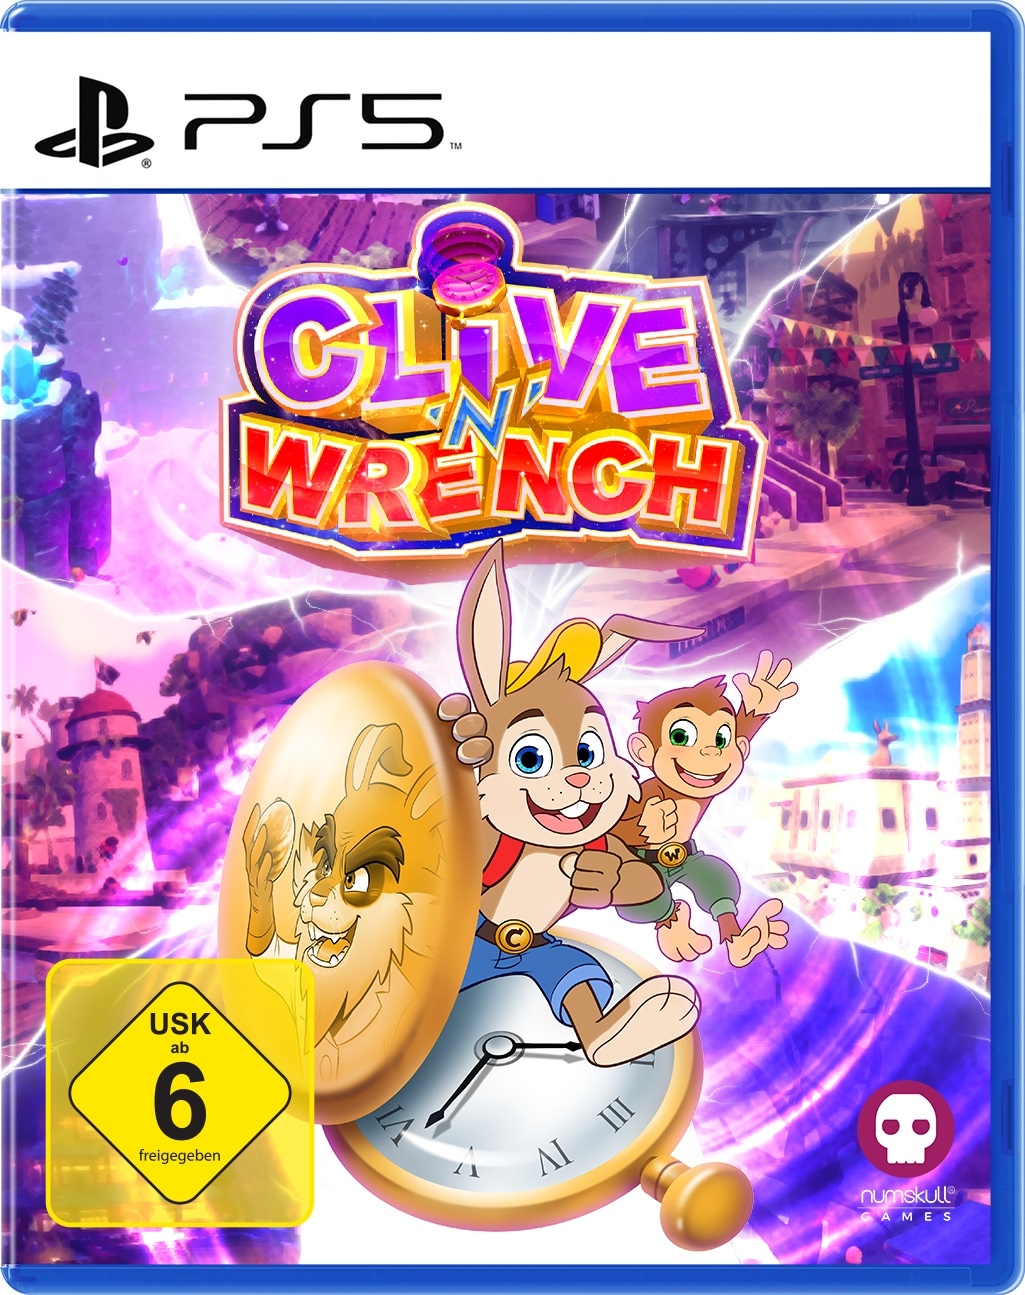 Spielesoftware »Clive n Wrench«, PlayStation 5